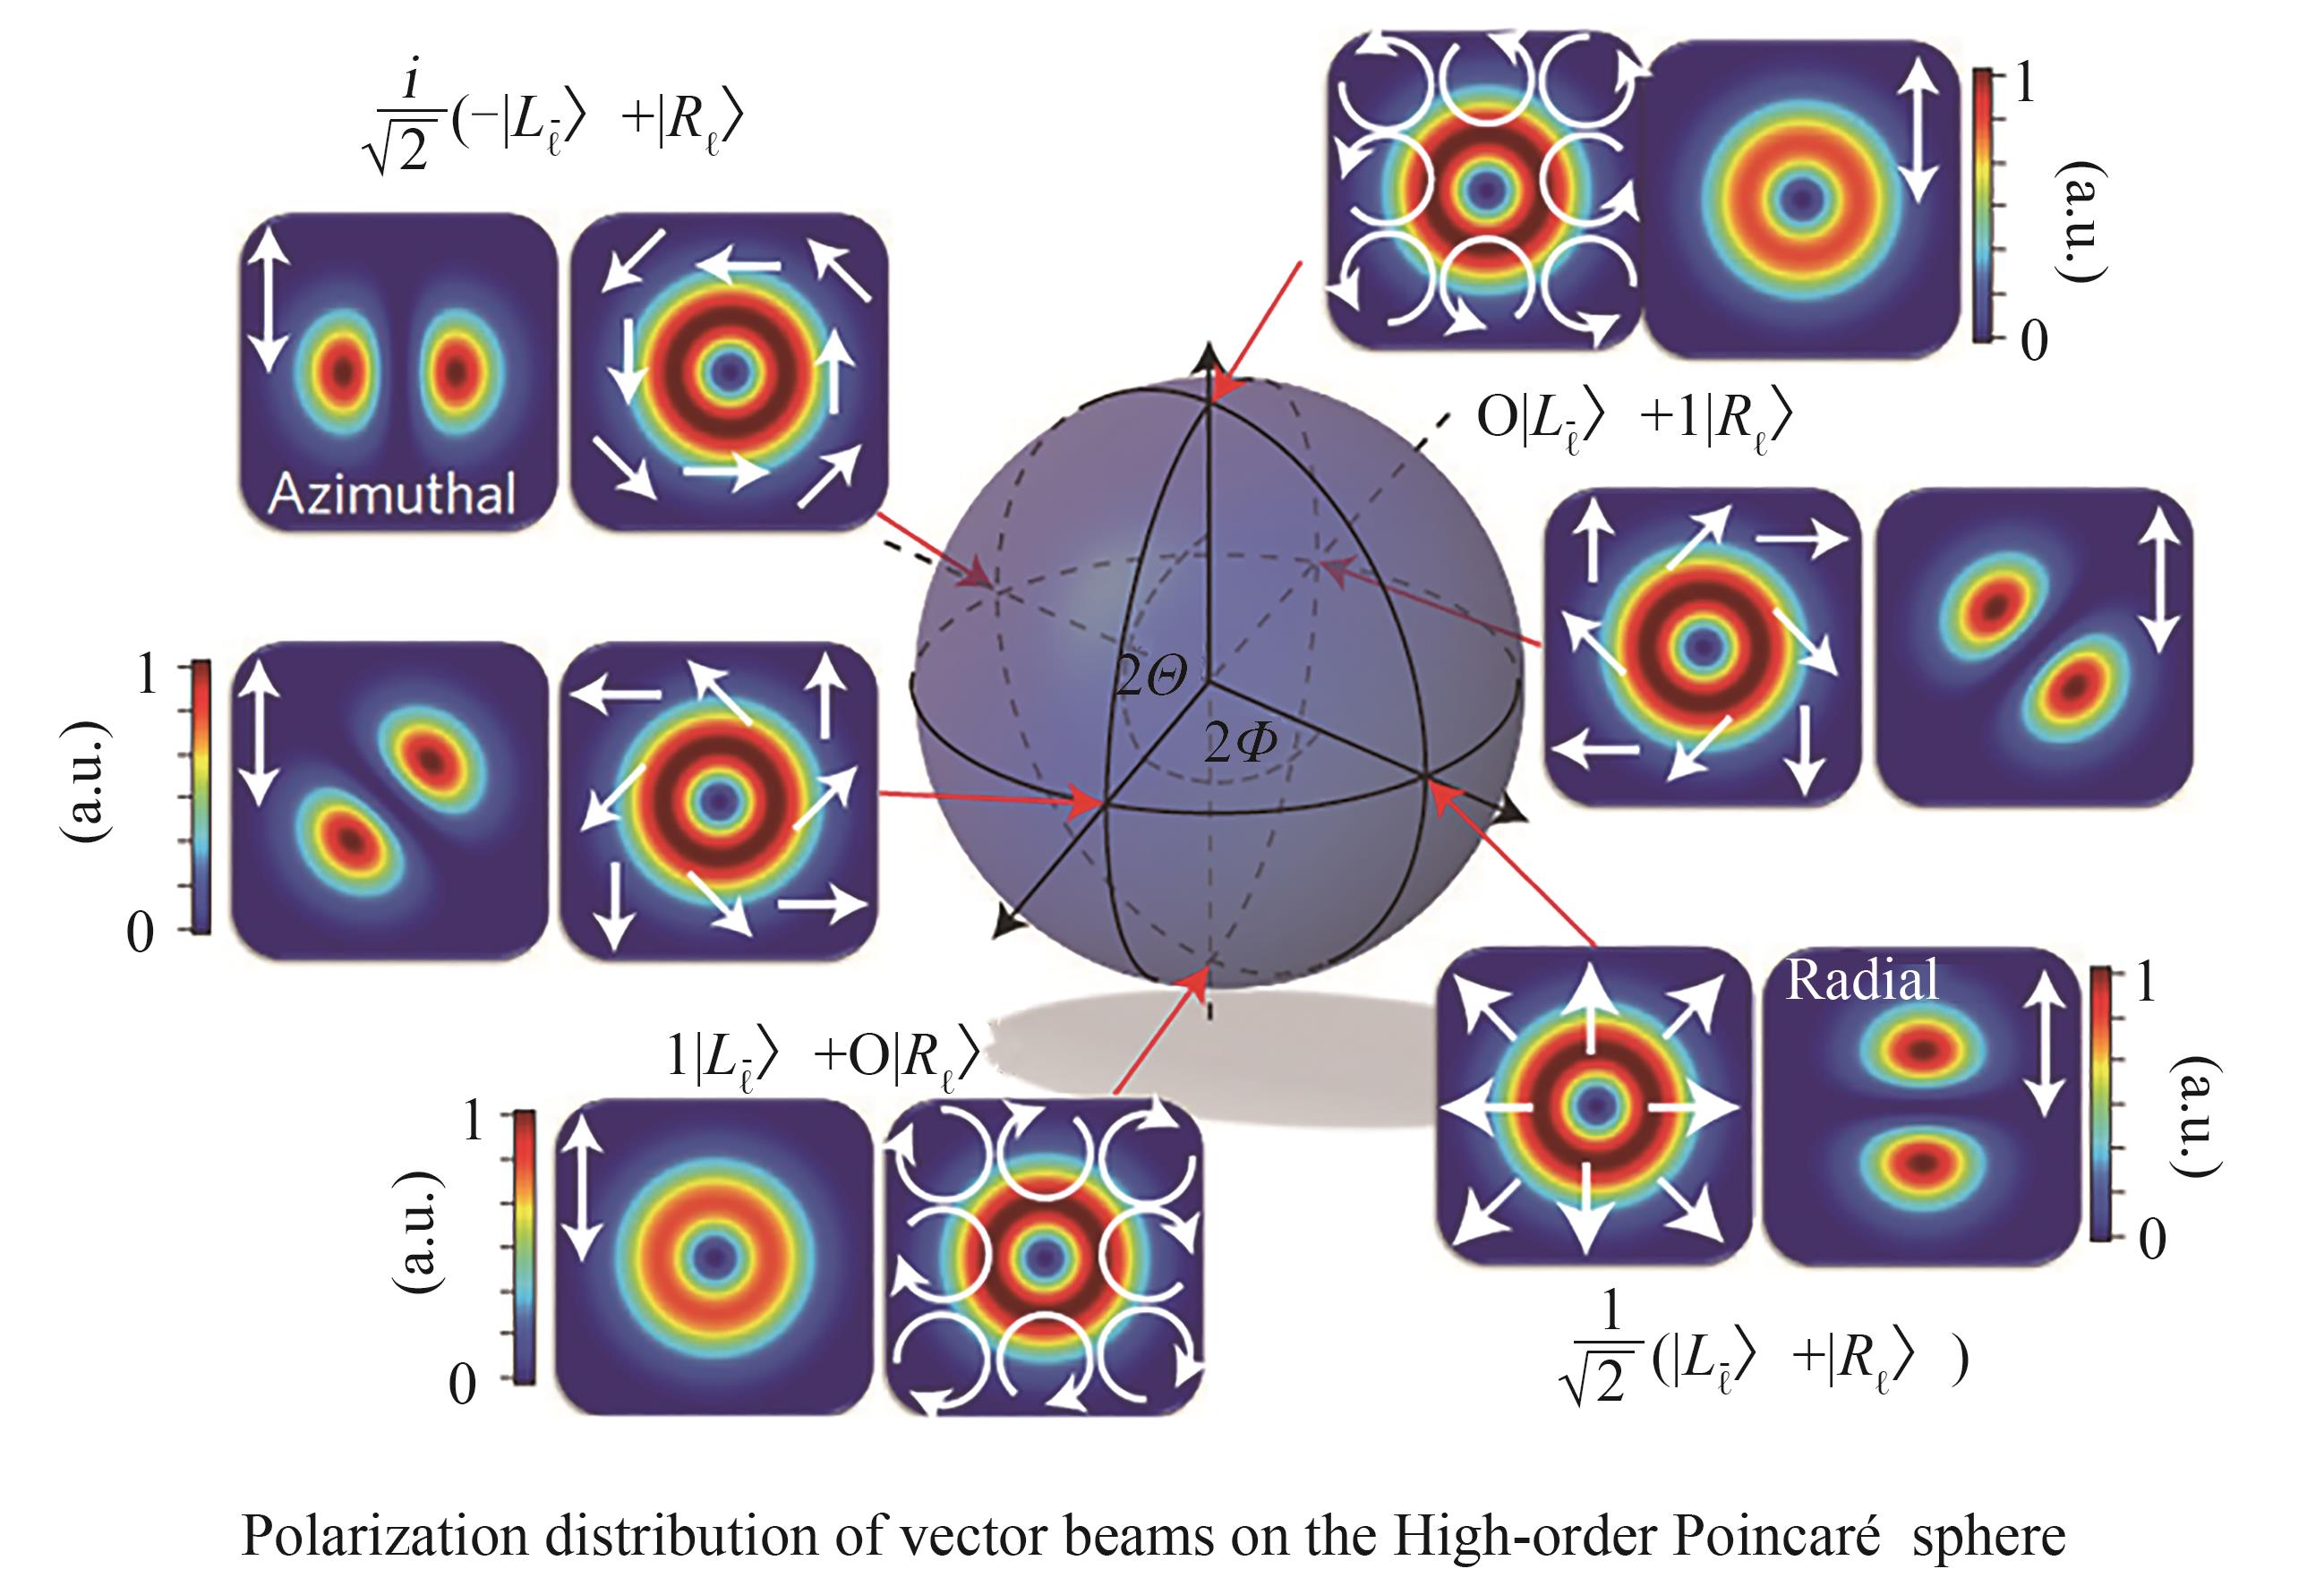 The spatial structure of vector beams ［18］